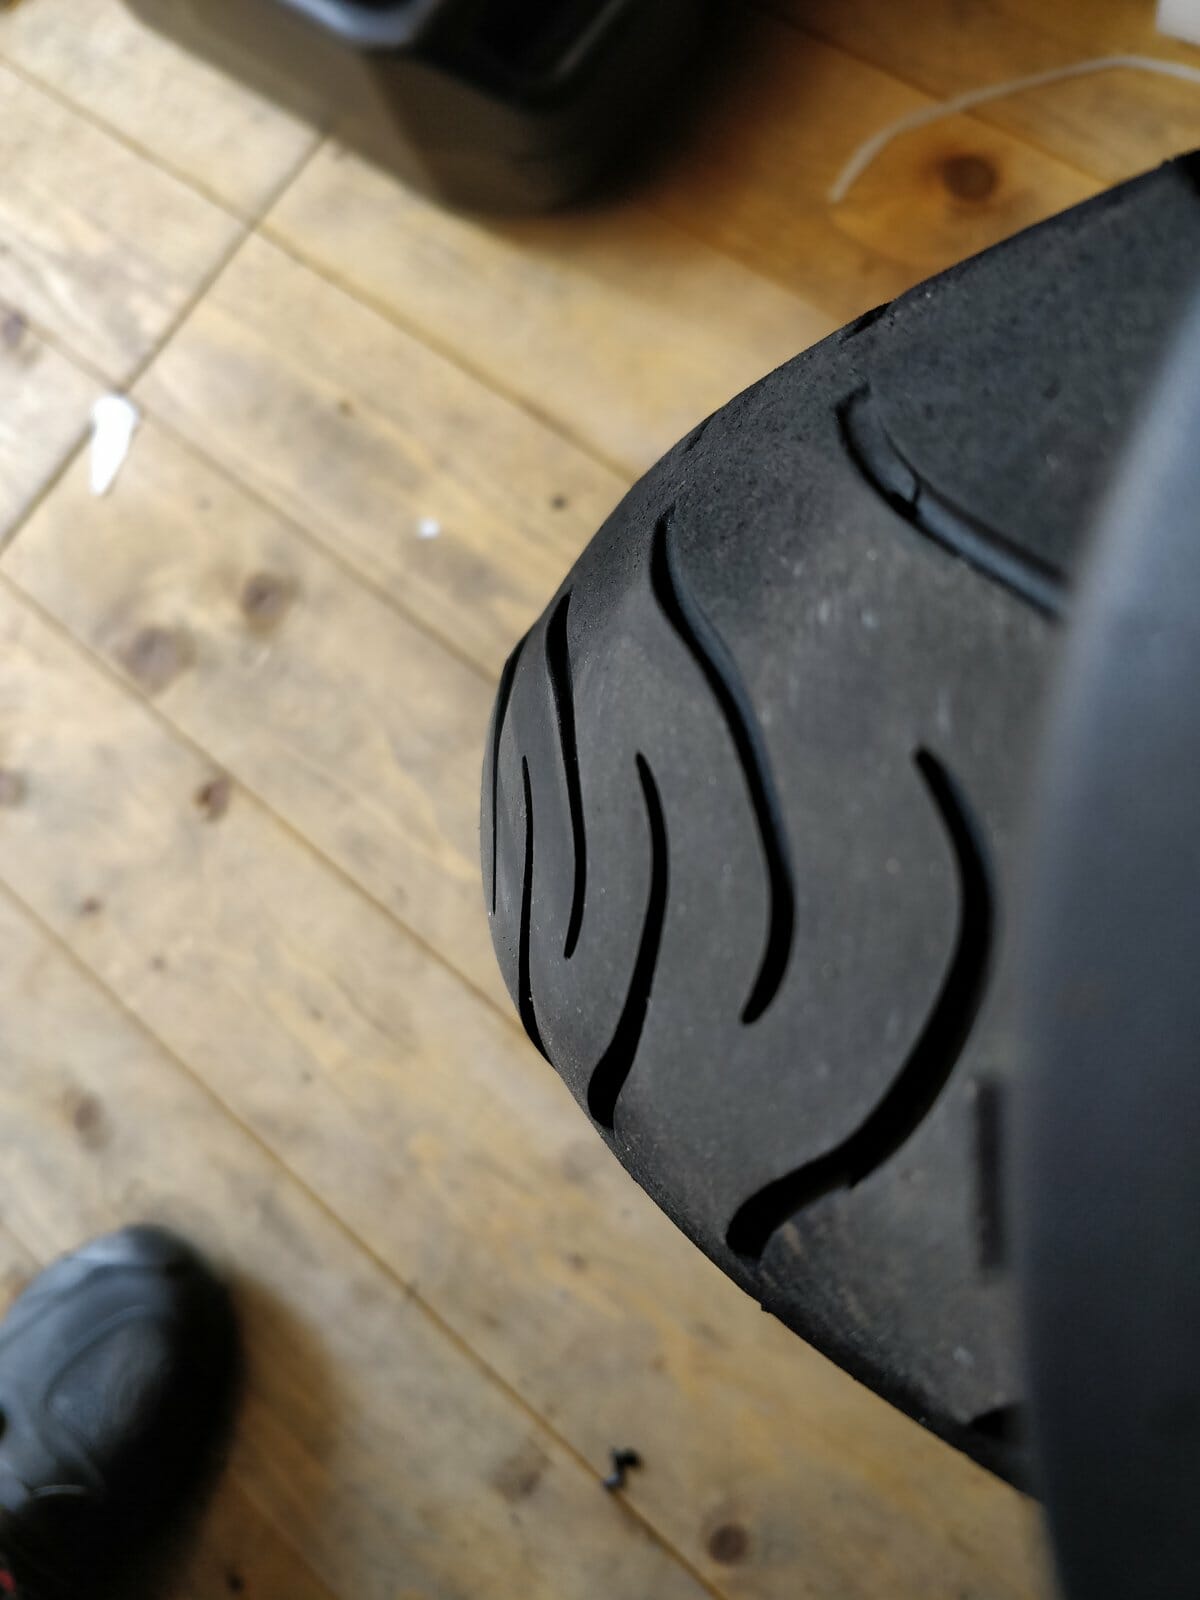 In a motorcycle which tyre wears faster the rear or the front